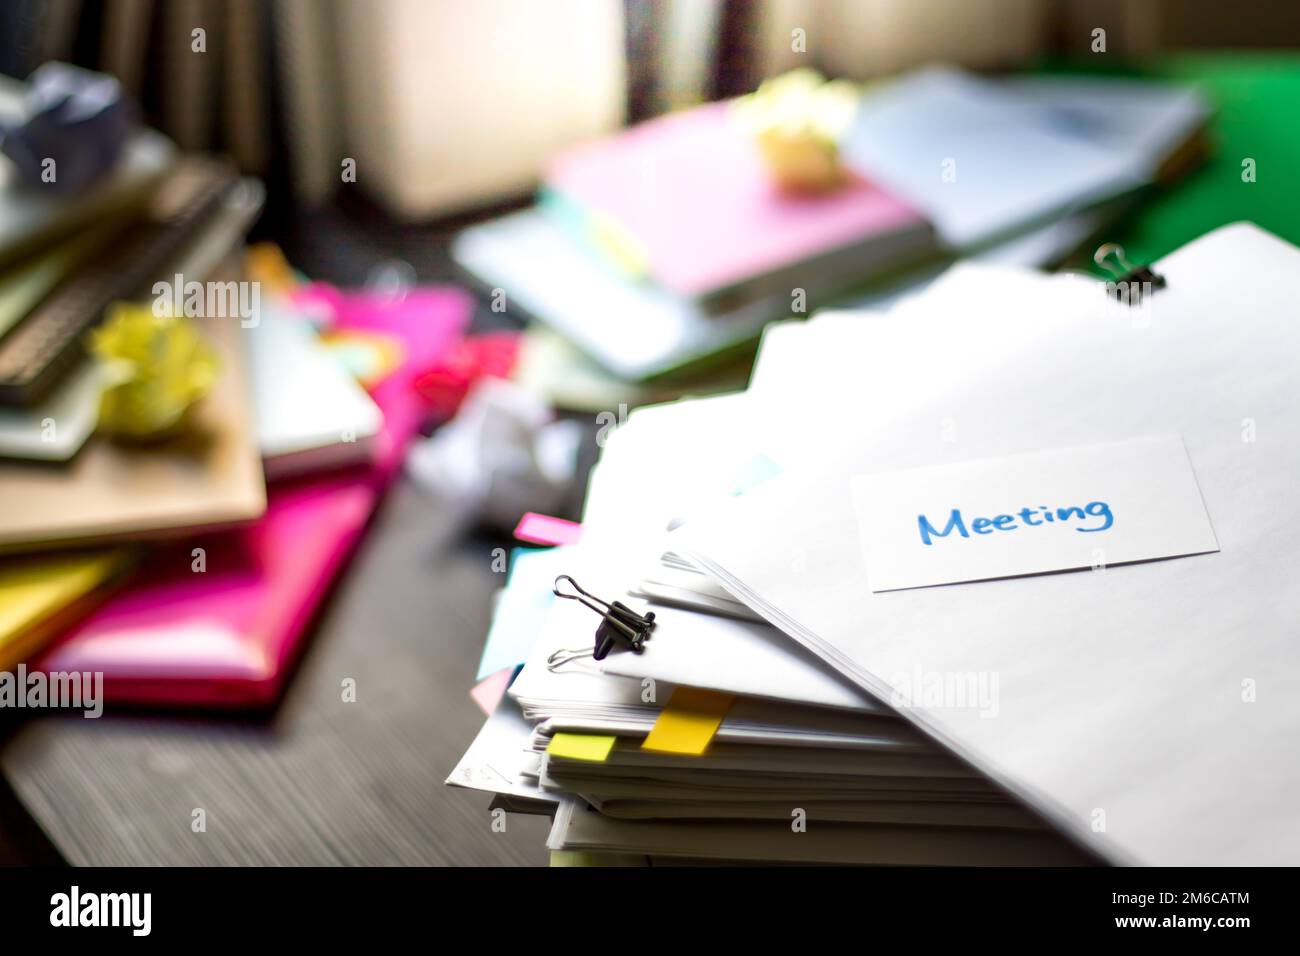 Meeting; Stack of Documents. Working or Studying at messy desk. Stock Photo